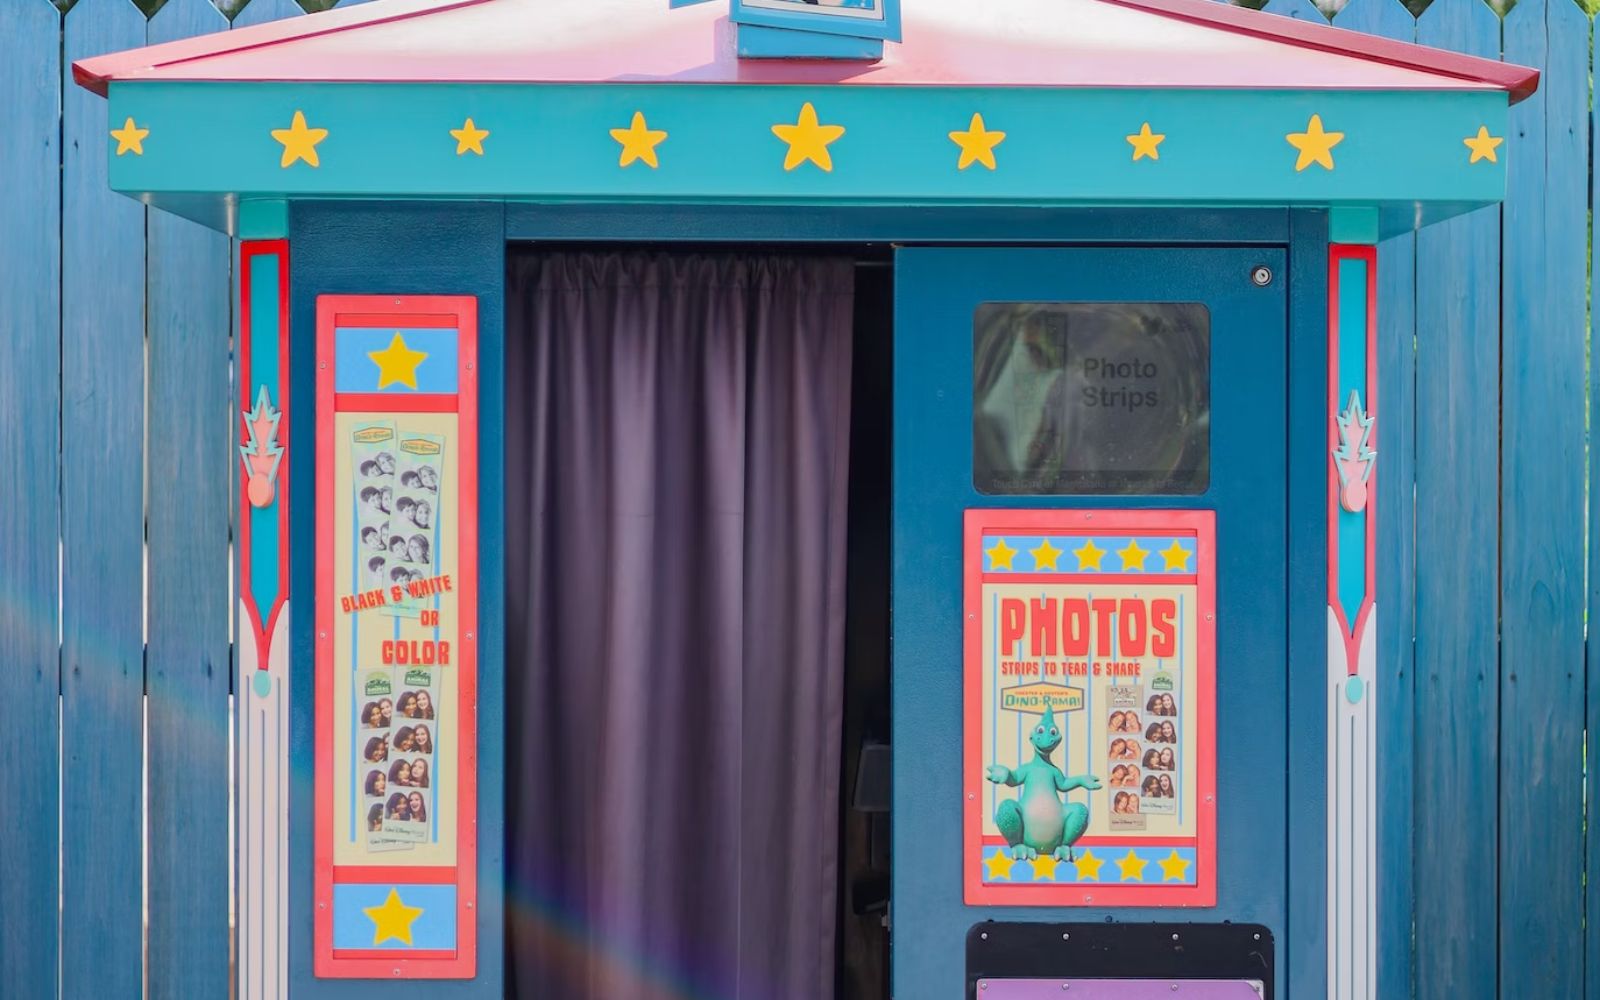 Catchy Photo Booth Slogans.